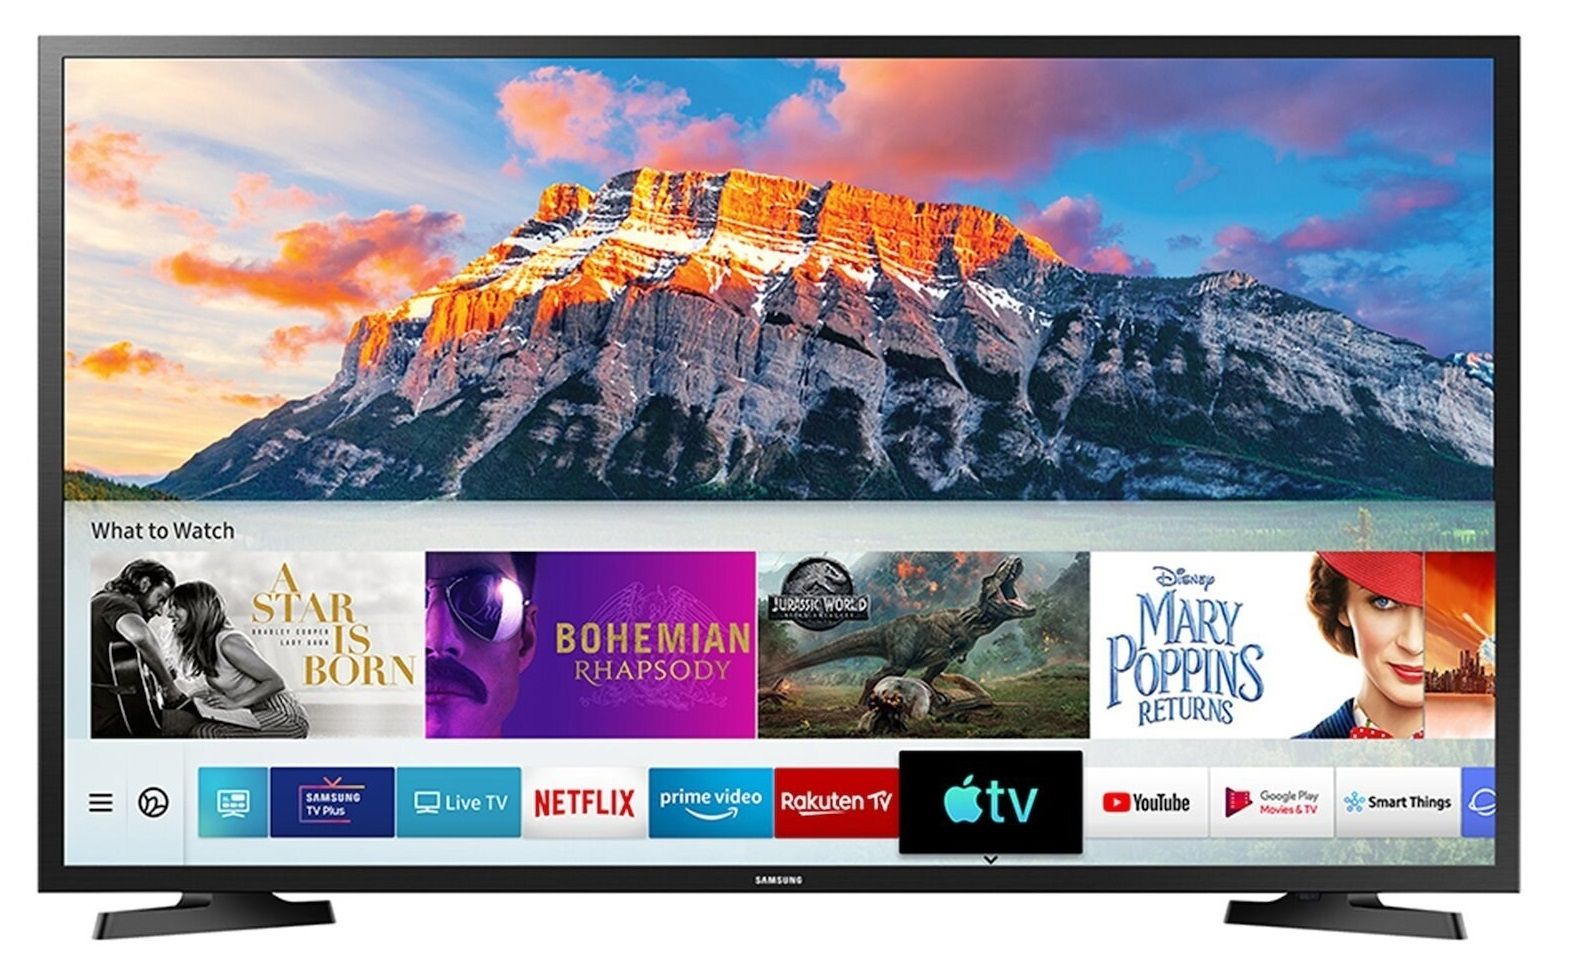 How Do I Watch Discovery Plus On My Samsung Smart TV